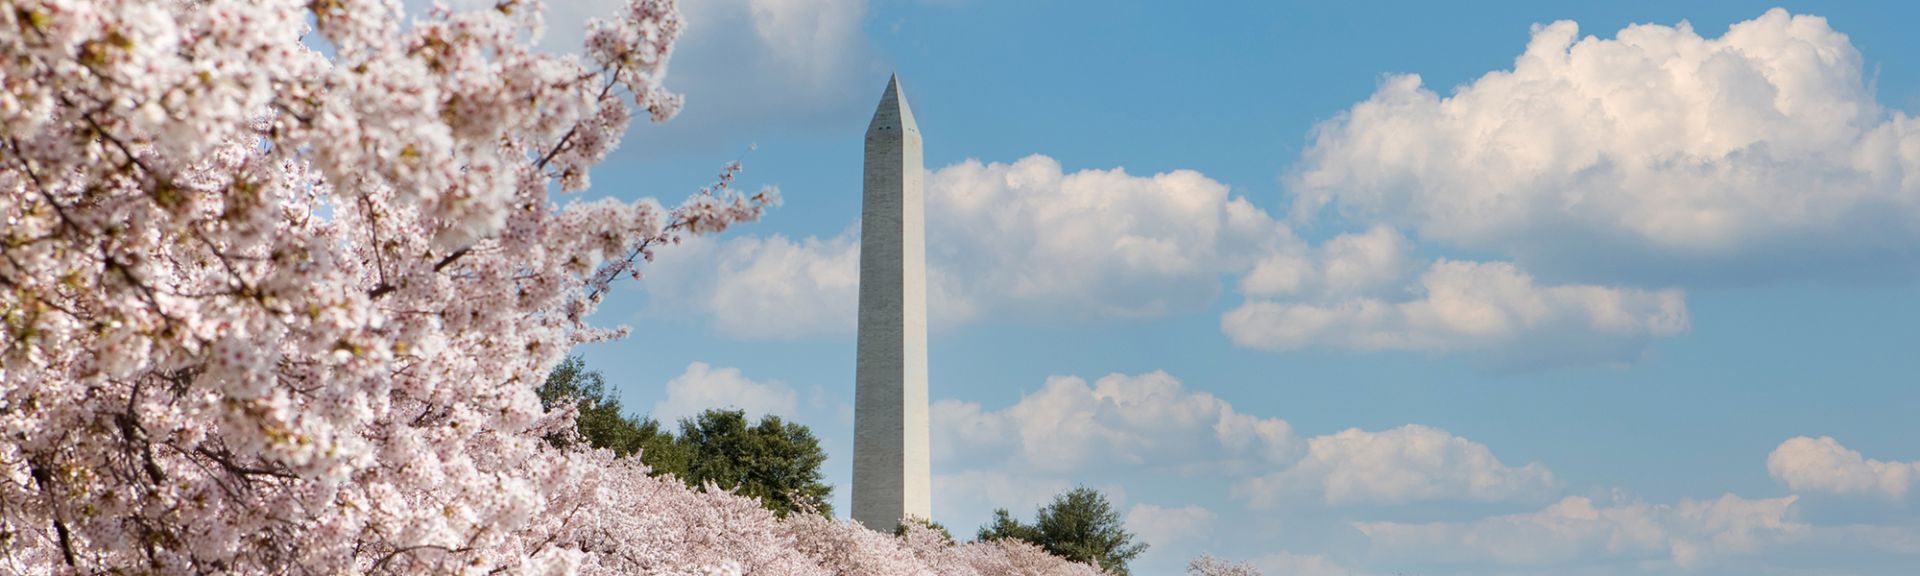 Washington Monument against a blue sky with clouds and pink cherry blossoms in the foreground